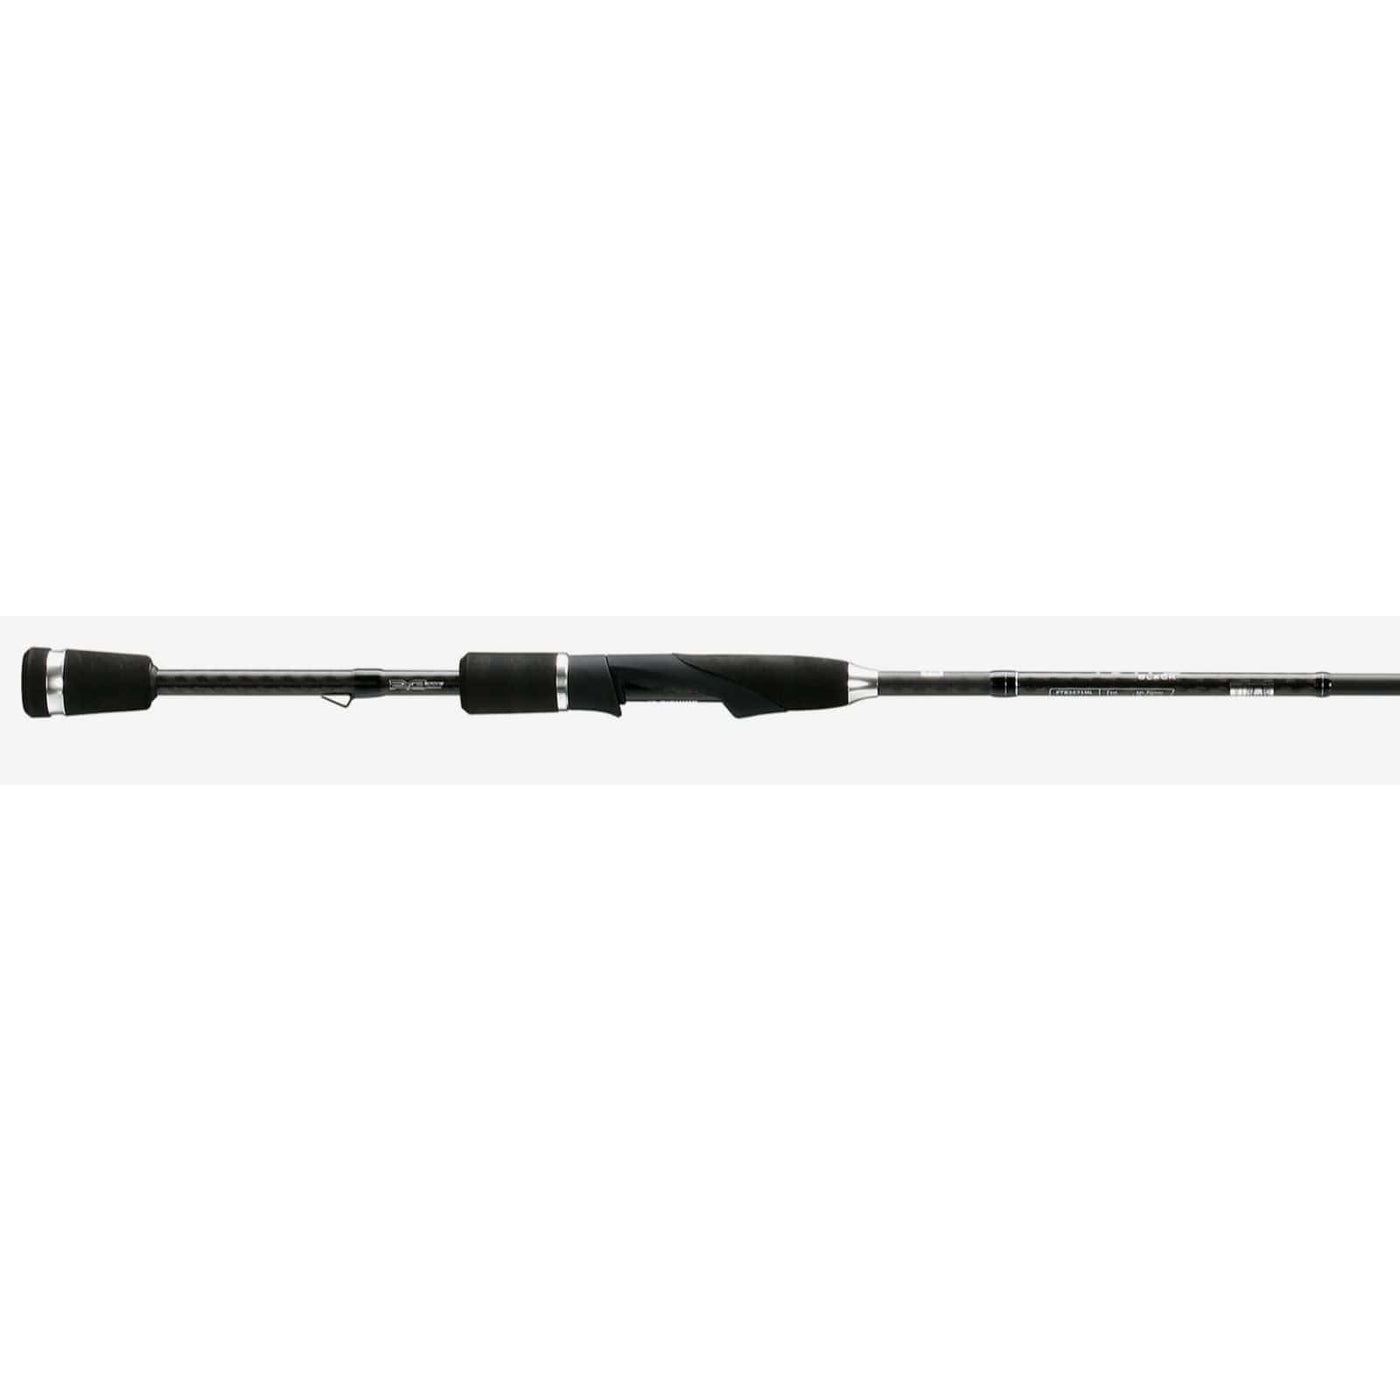 13 Fishing 13 Fishing Fate Black 7ft 1in MH Spinning Rod Fishing